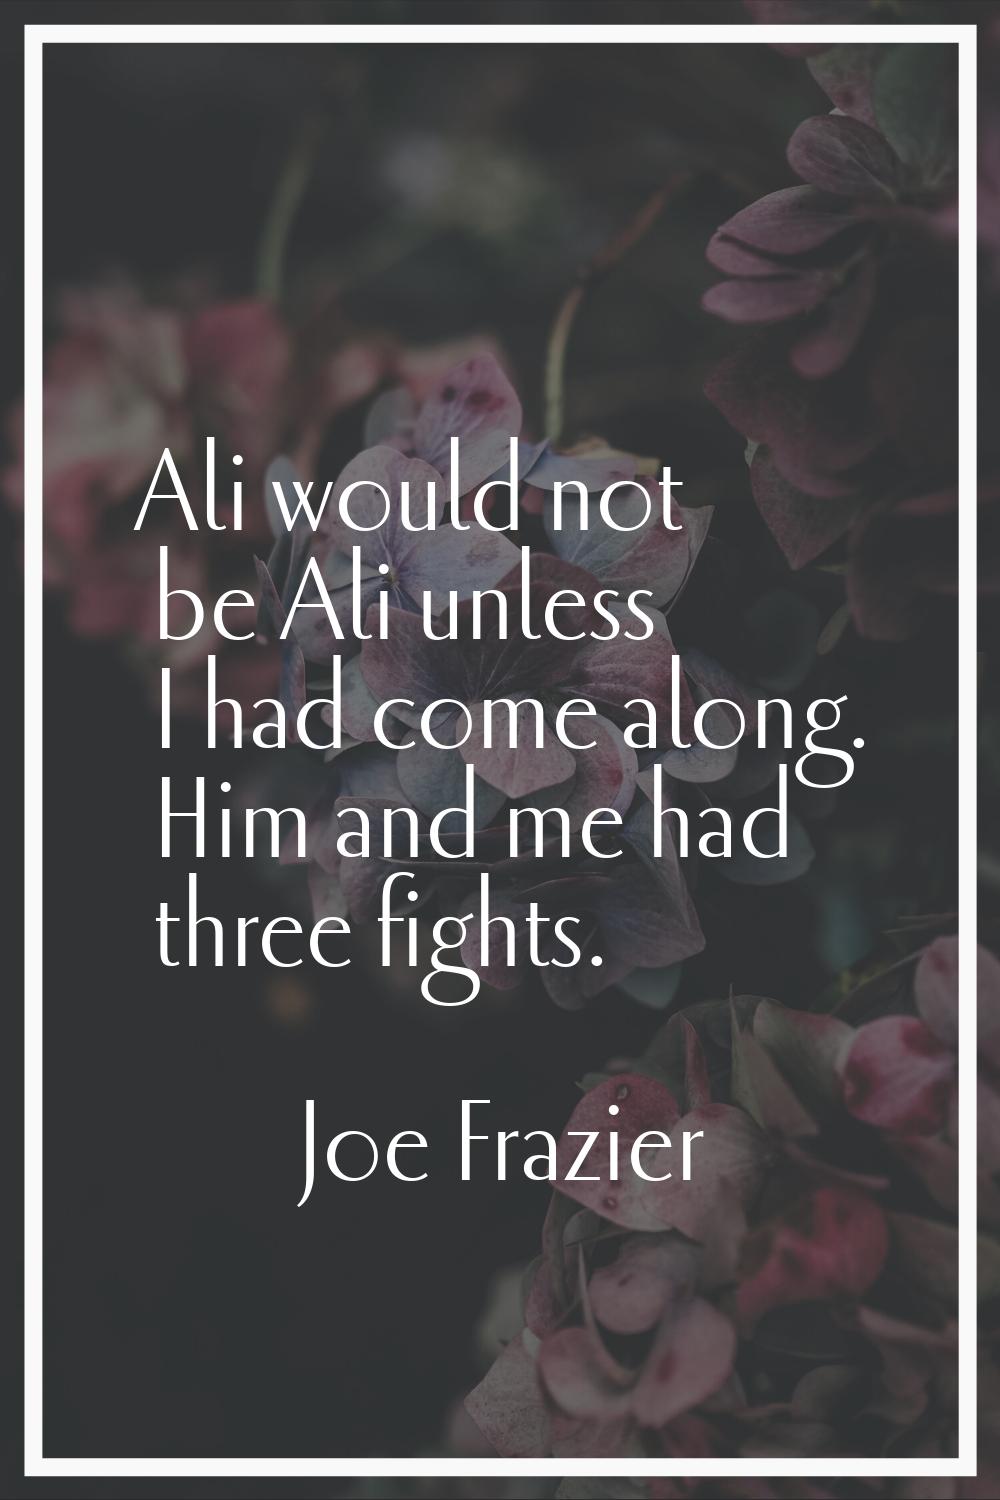 Ali would not be Ali unless I had come along. Him and me had three fights.